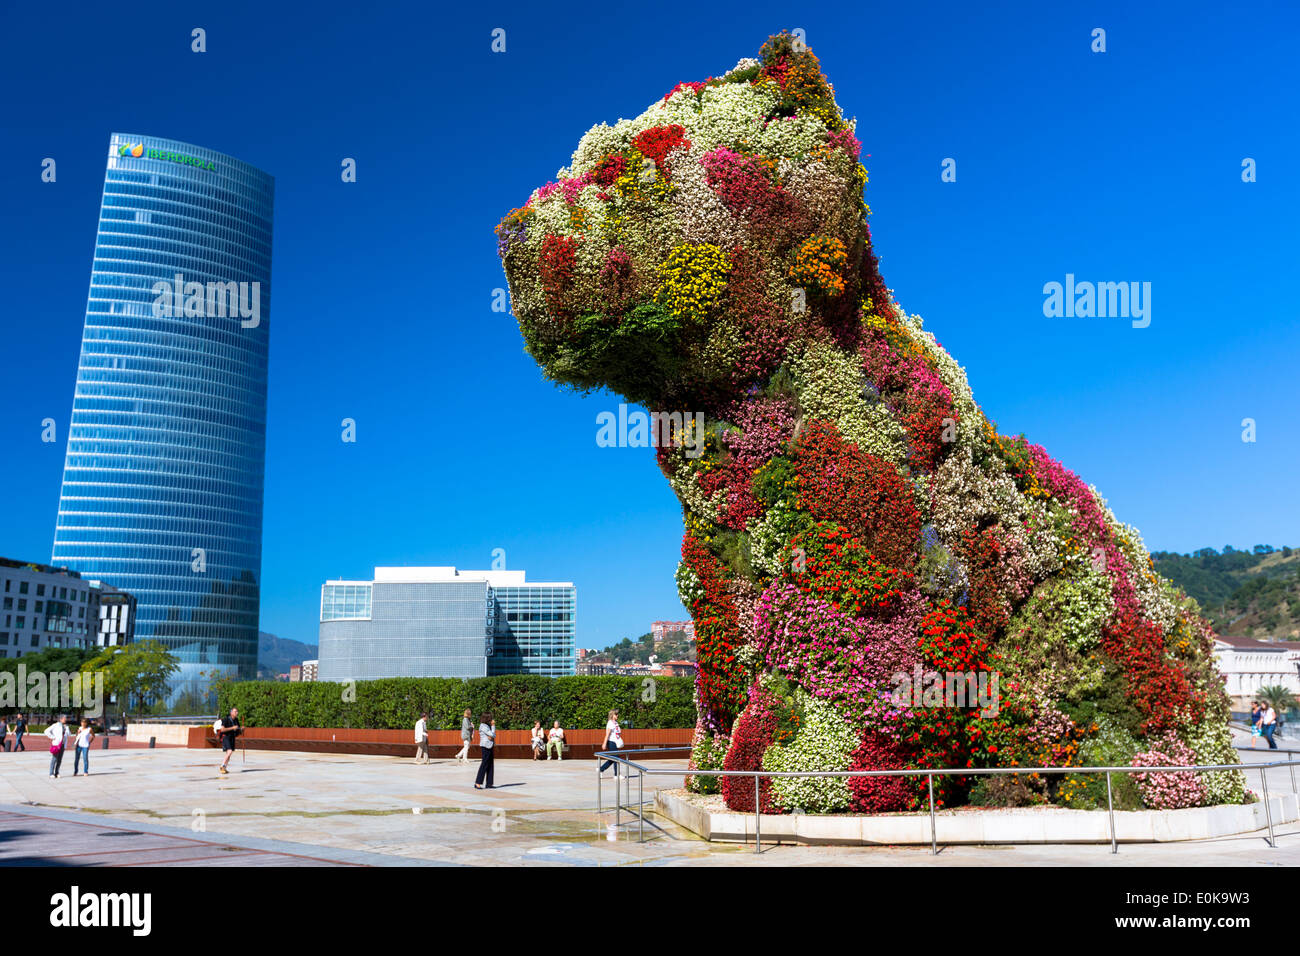 Puppy flower feature floral art in dog form by Jeff Koons at Guggenheim Museum, Iberdrola Tower, Bilbao, Spain Stock Photo